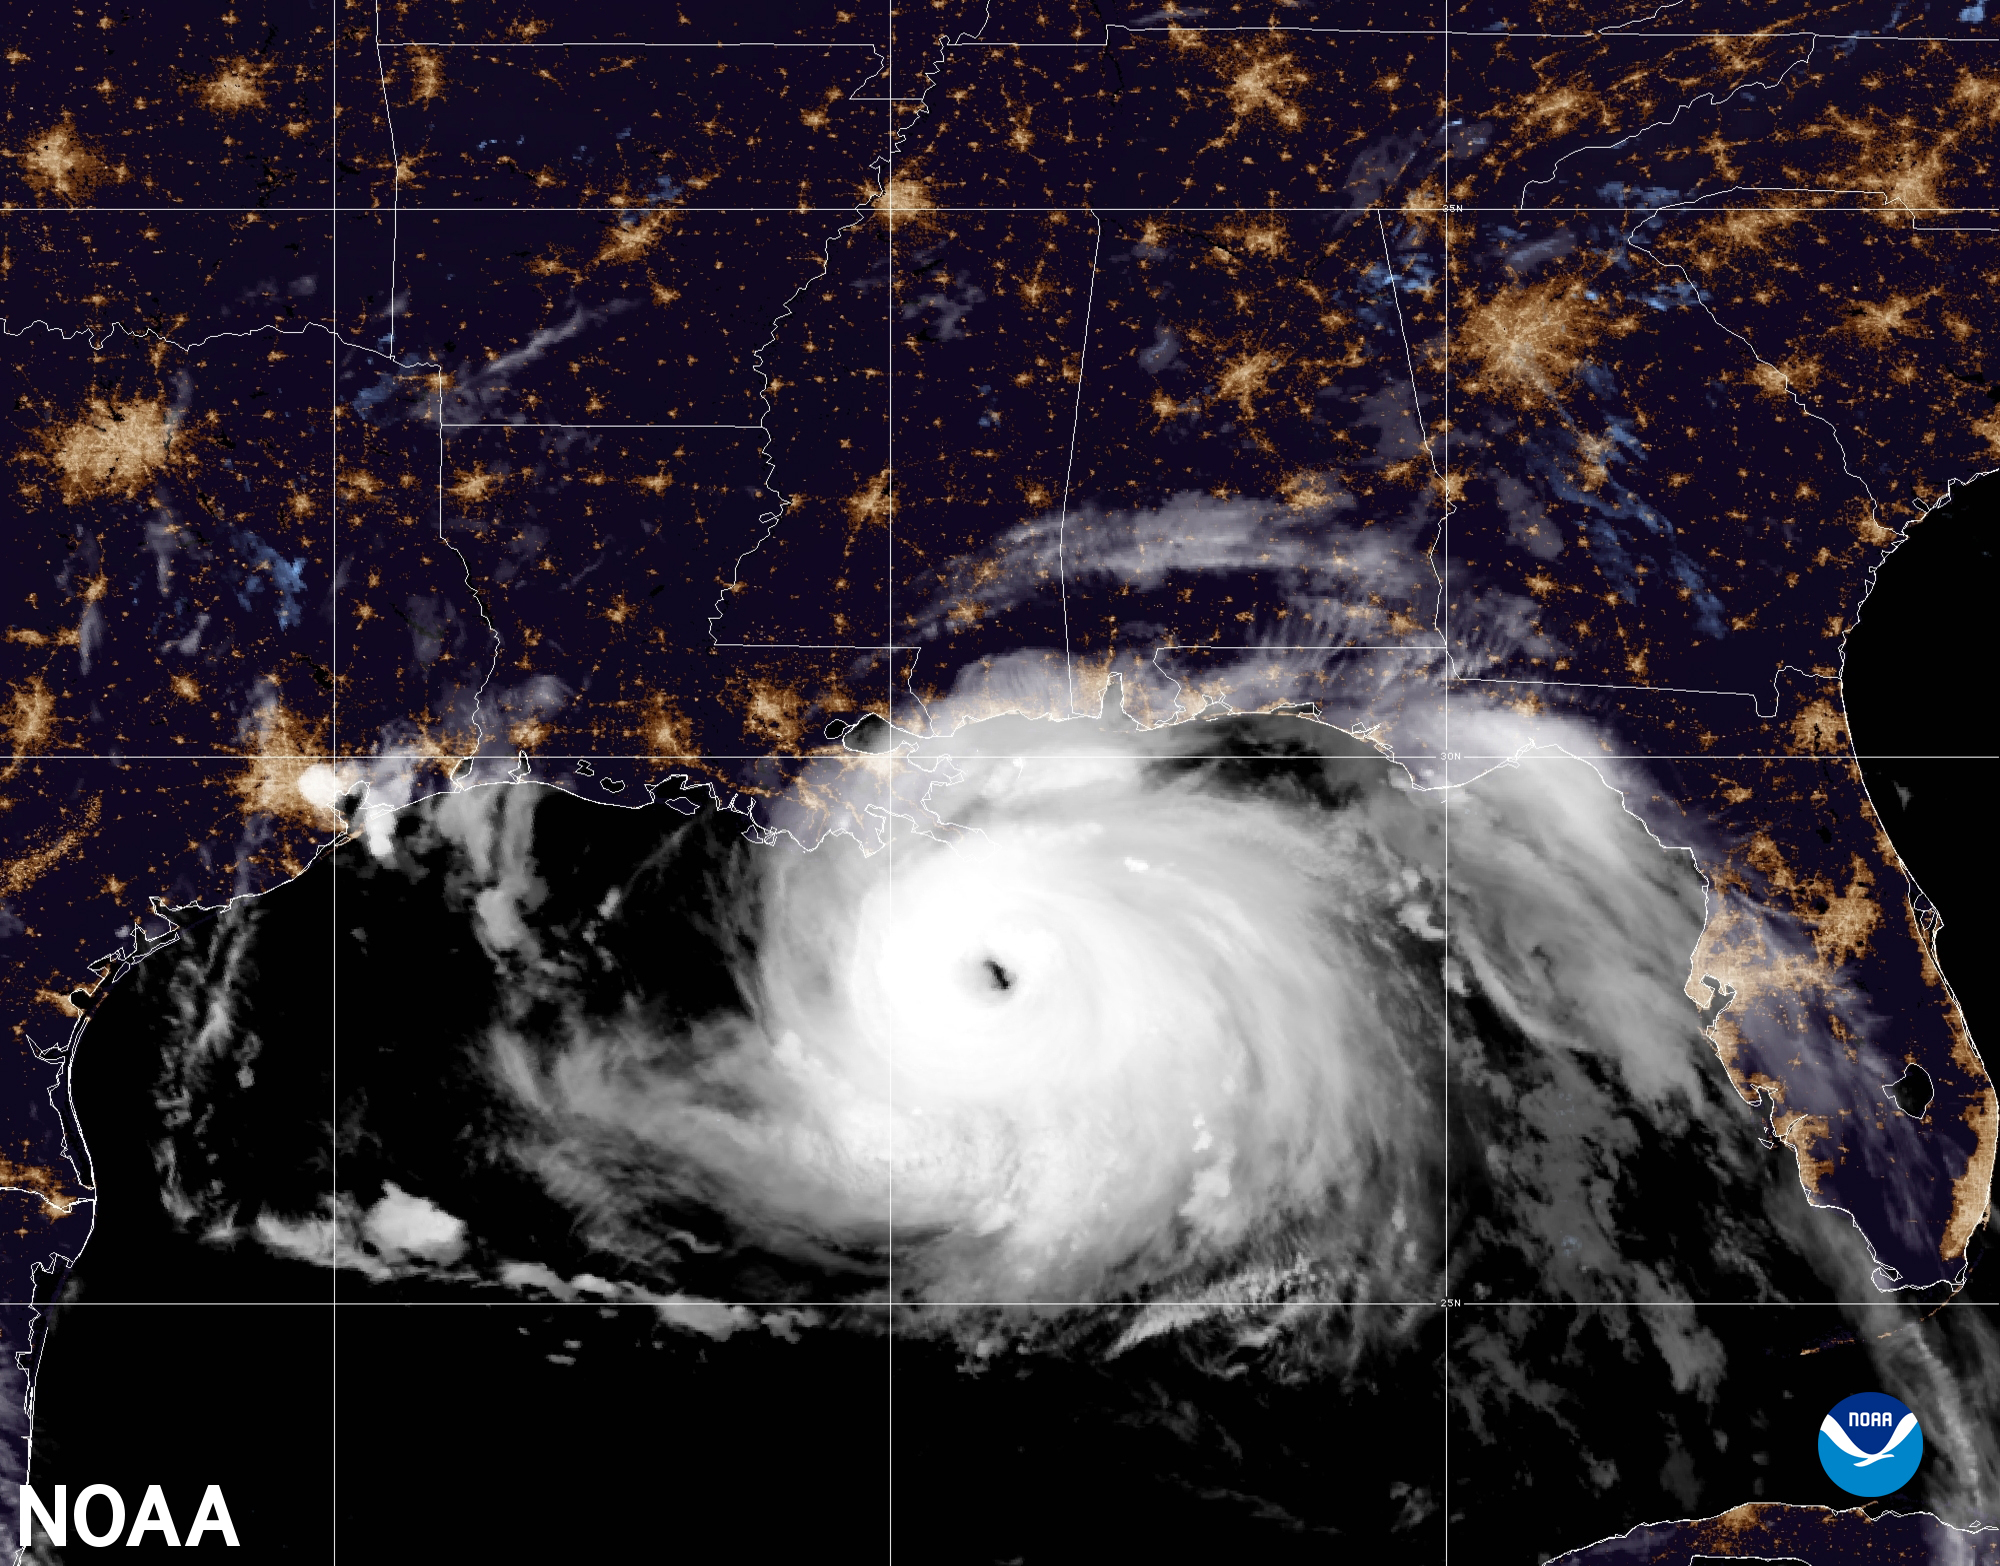 A visible satellite image of Hurricane Ida approaching land in the Gulf of Mexico taken by NOAA's GOES-16 satellite Aug. 29, 2021.